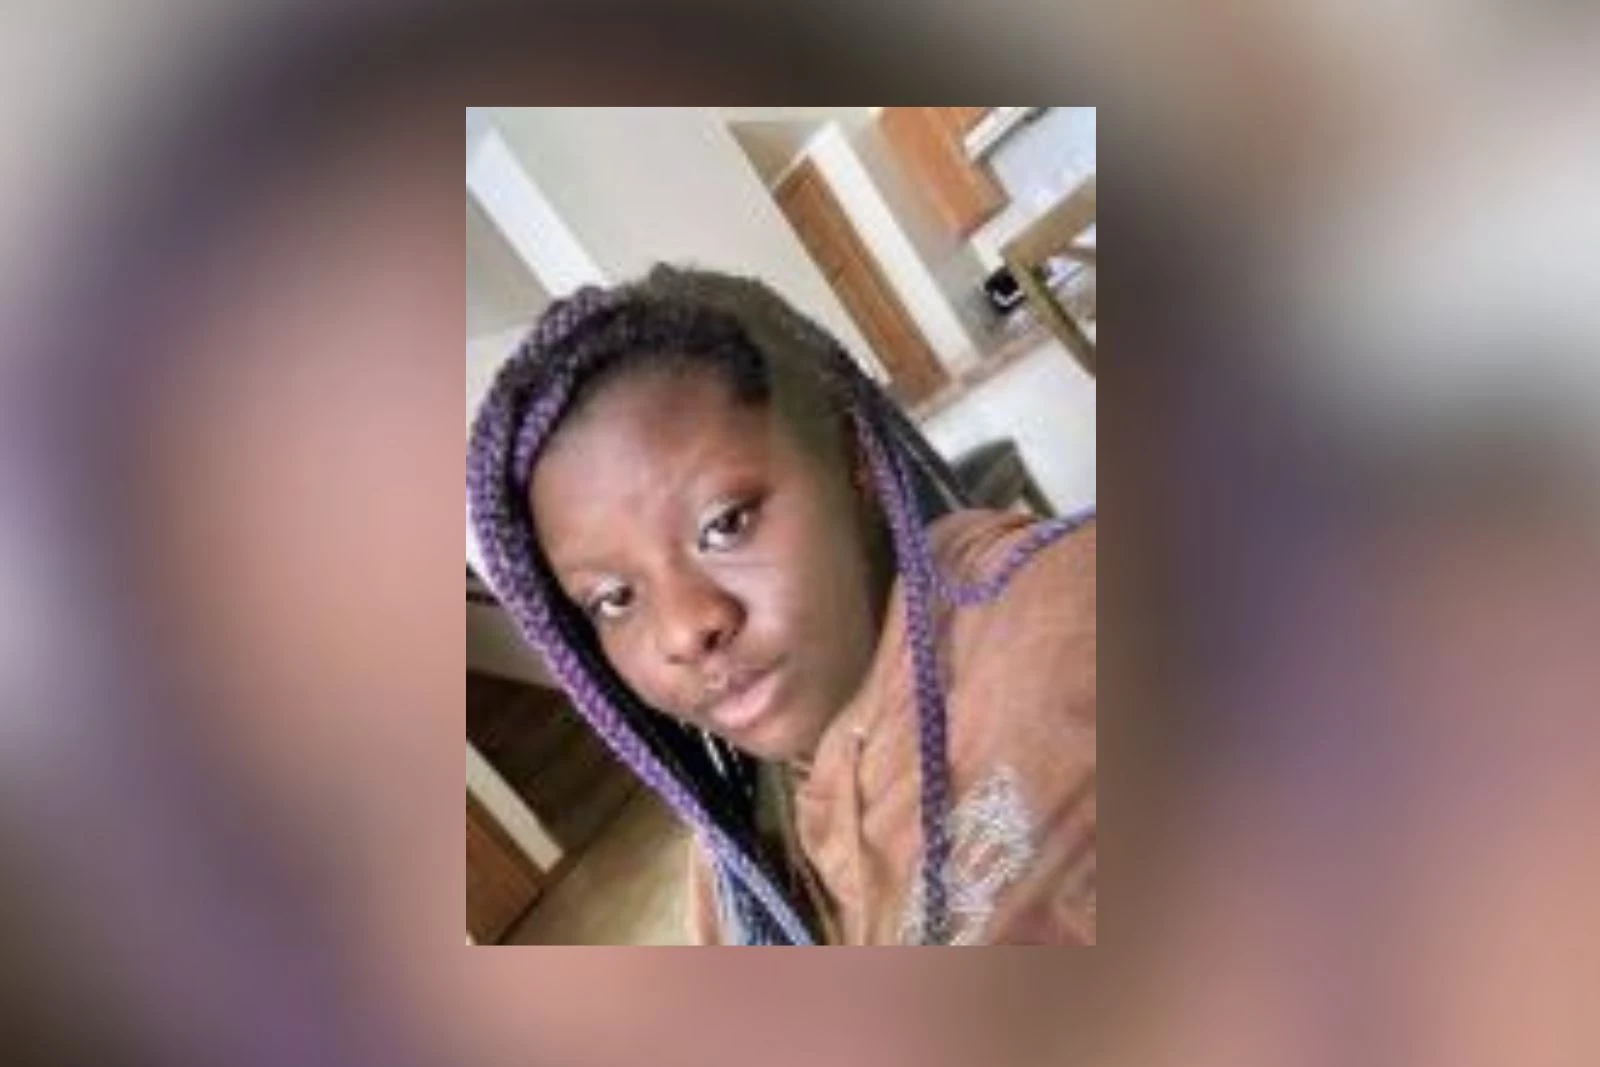 Alert Issued Statewide For Missing Minnesota 14-Year-Old